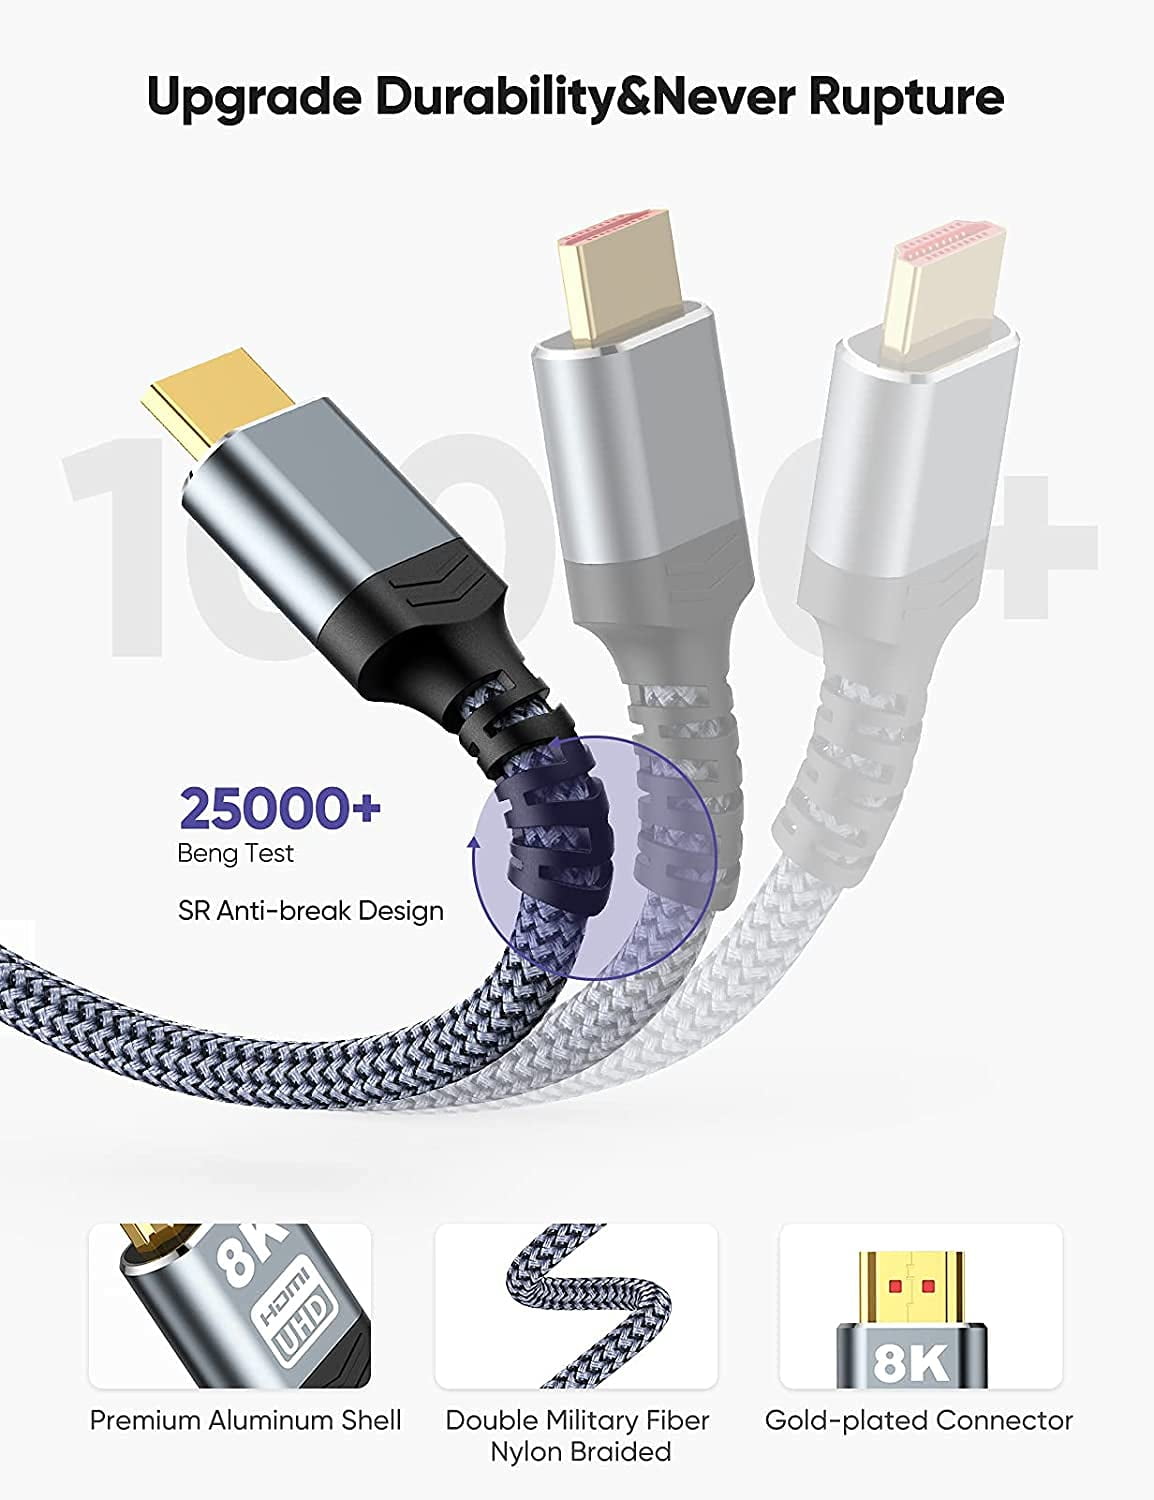 HDMI 2.1 Cable, Ultra High Speed 48Gbps 8K HDMI Cable 8ft, ARISEN 4K120  8K@60Hz Heavy Duty Braided HDMI Cord eARC HDR10 Compatible with RTX 3090  3080